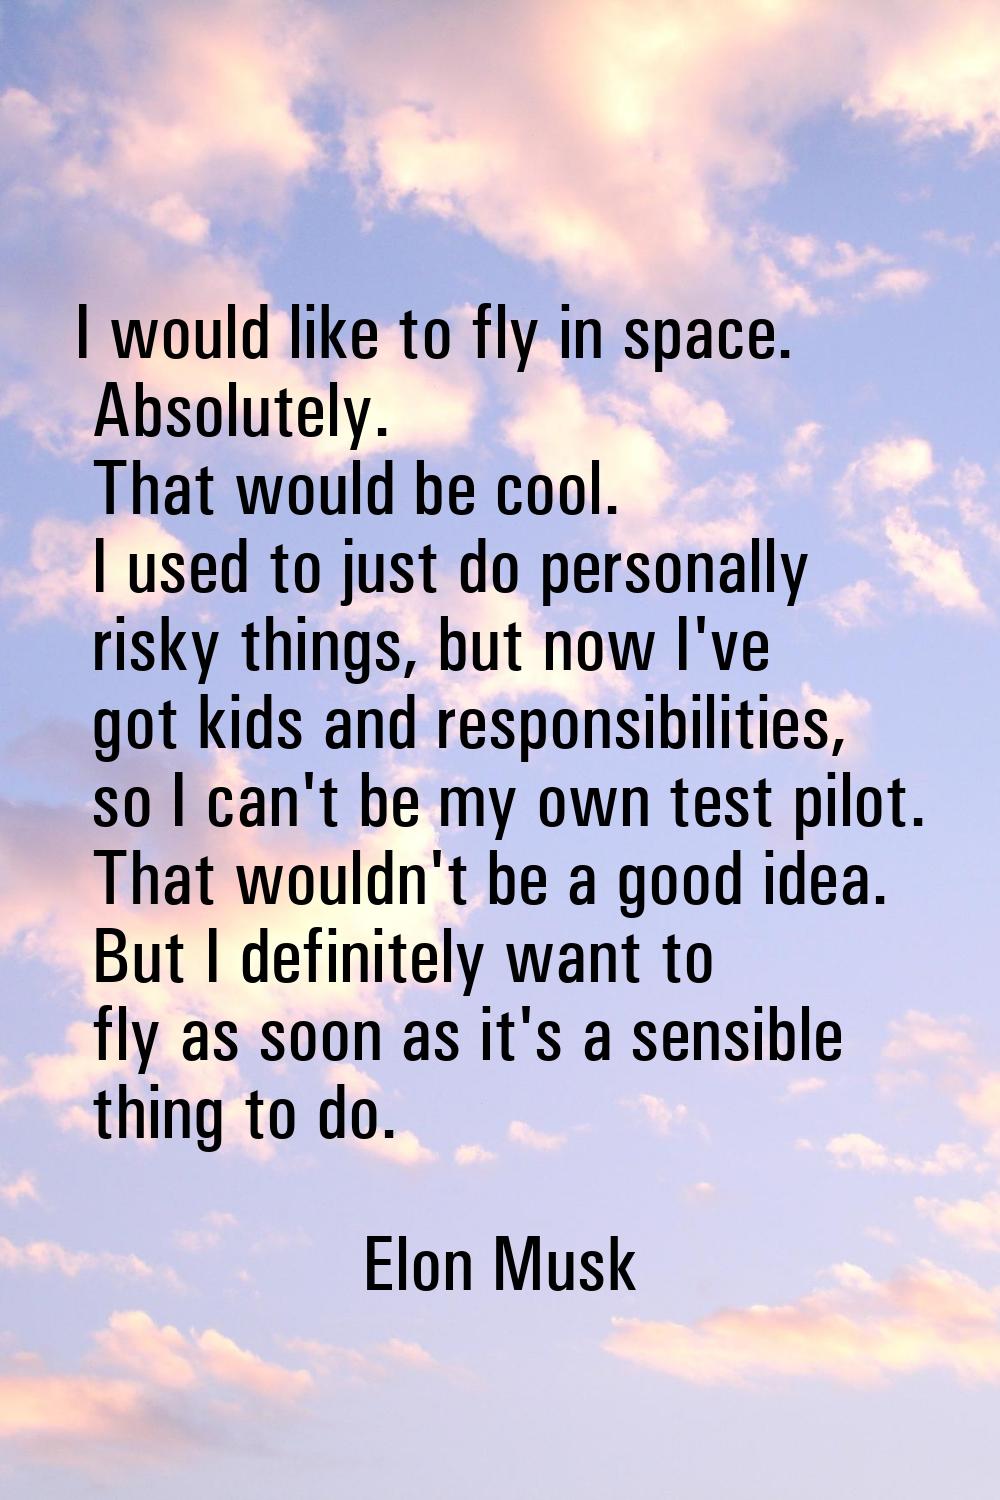 I would like to fly in space. Absolutely. That would be cool. I used to just do personally risky th